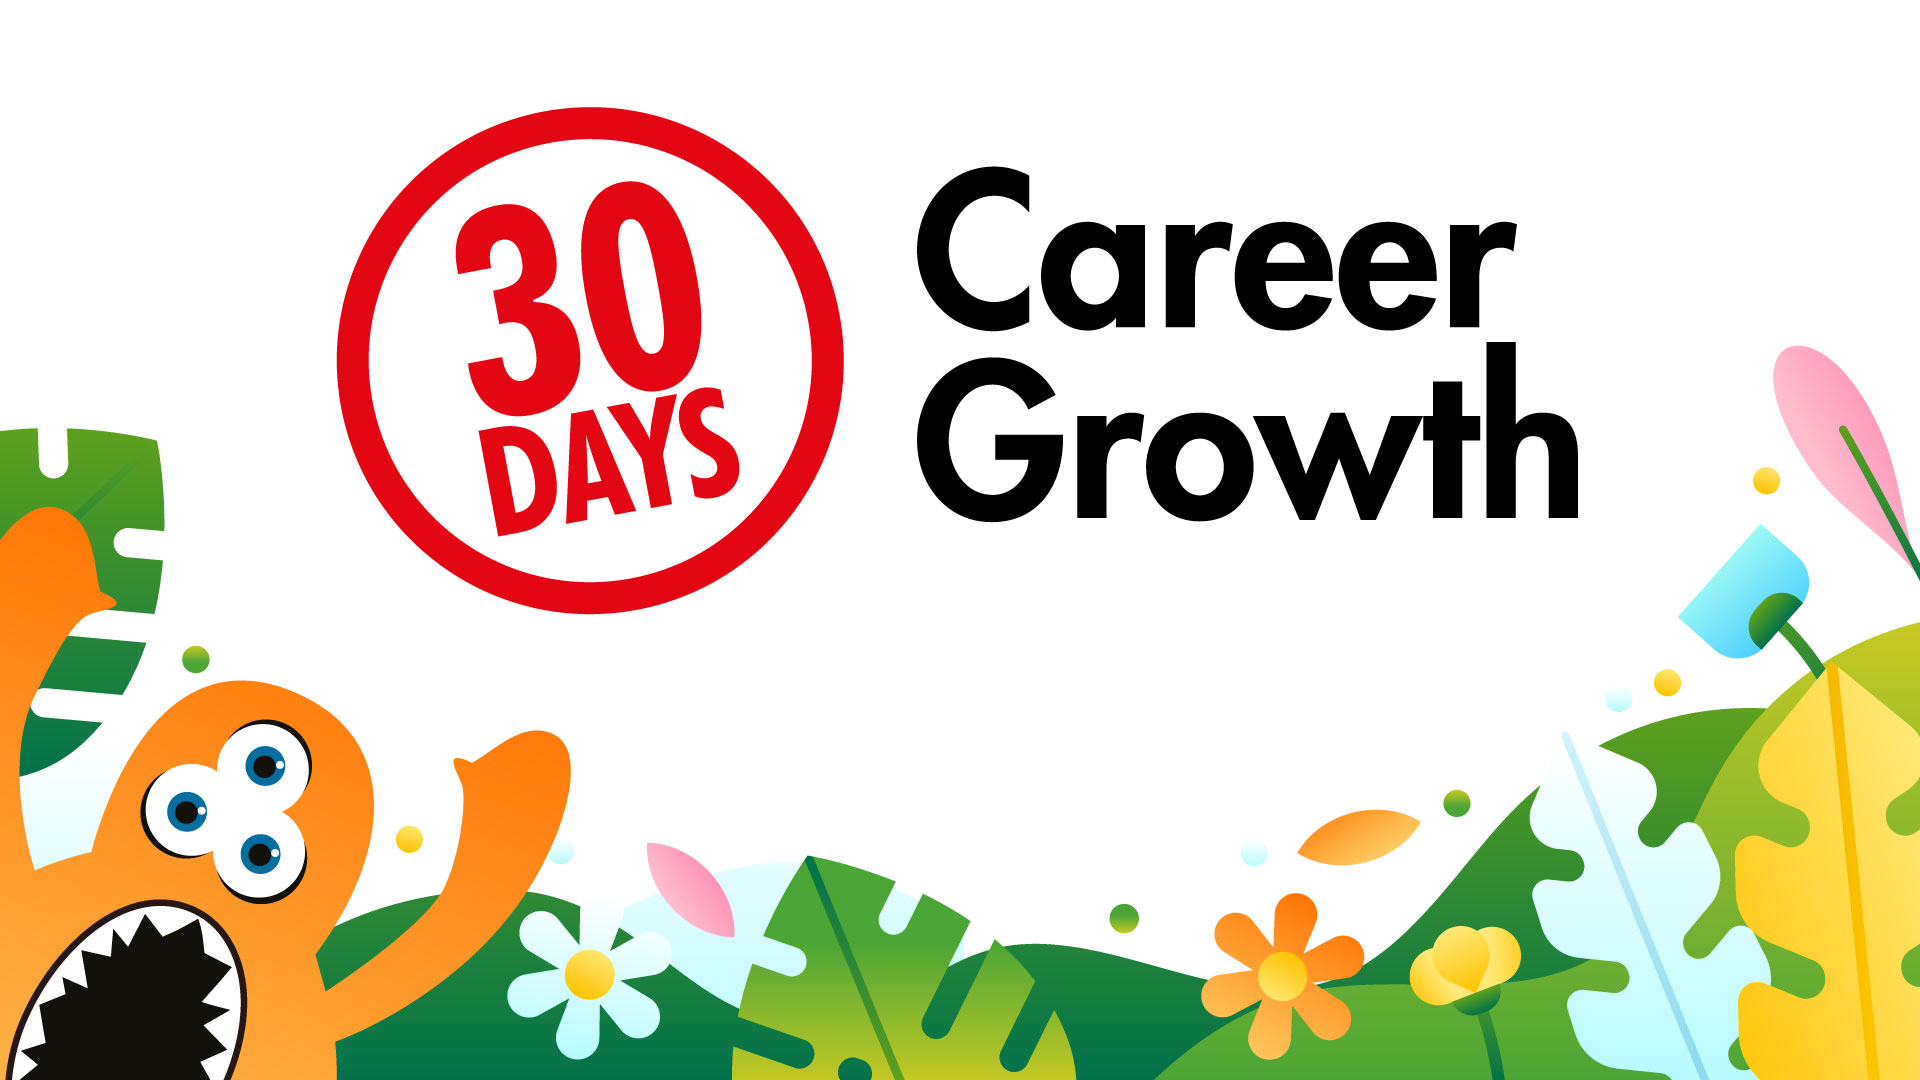 30 Days of Career Growth image